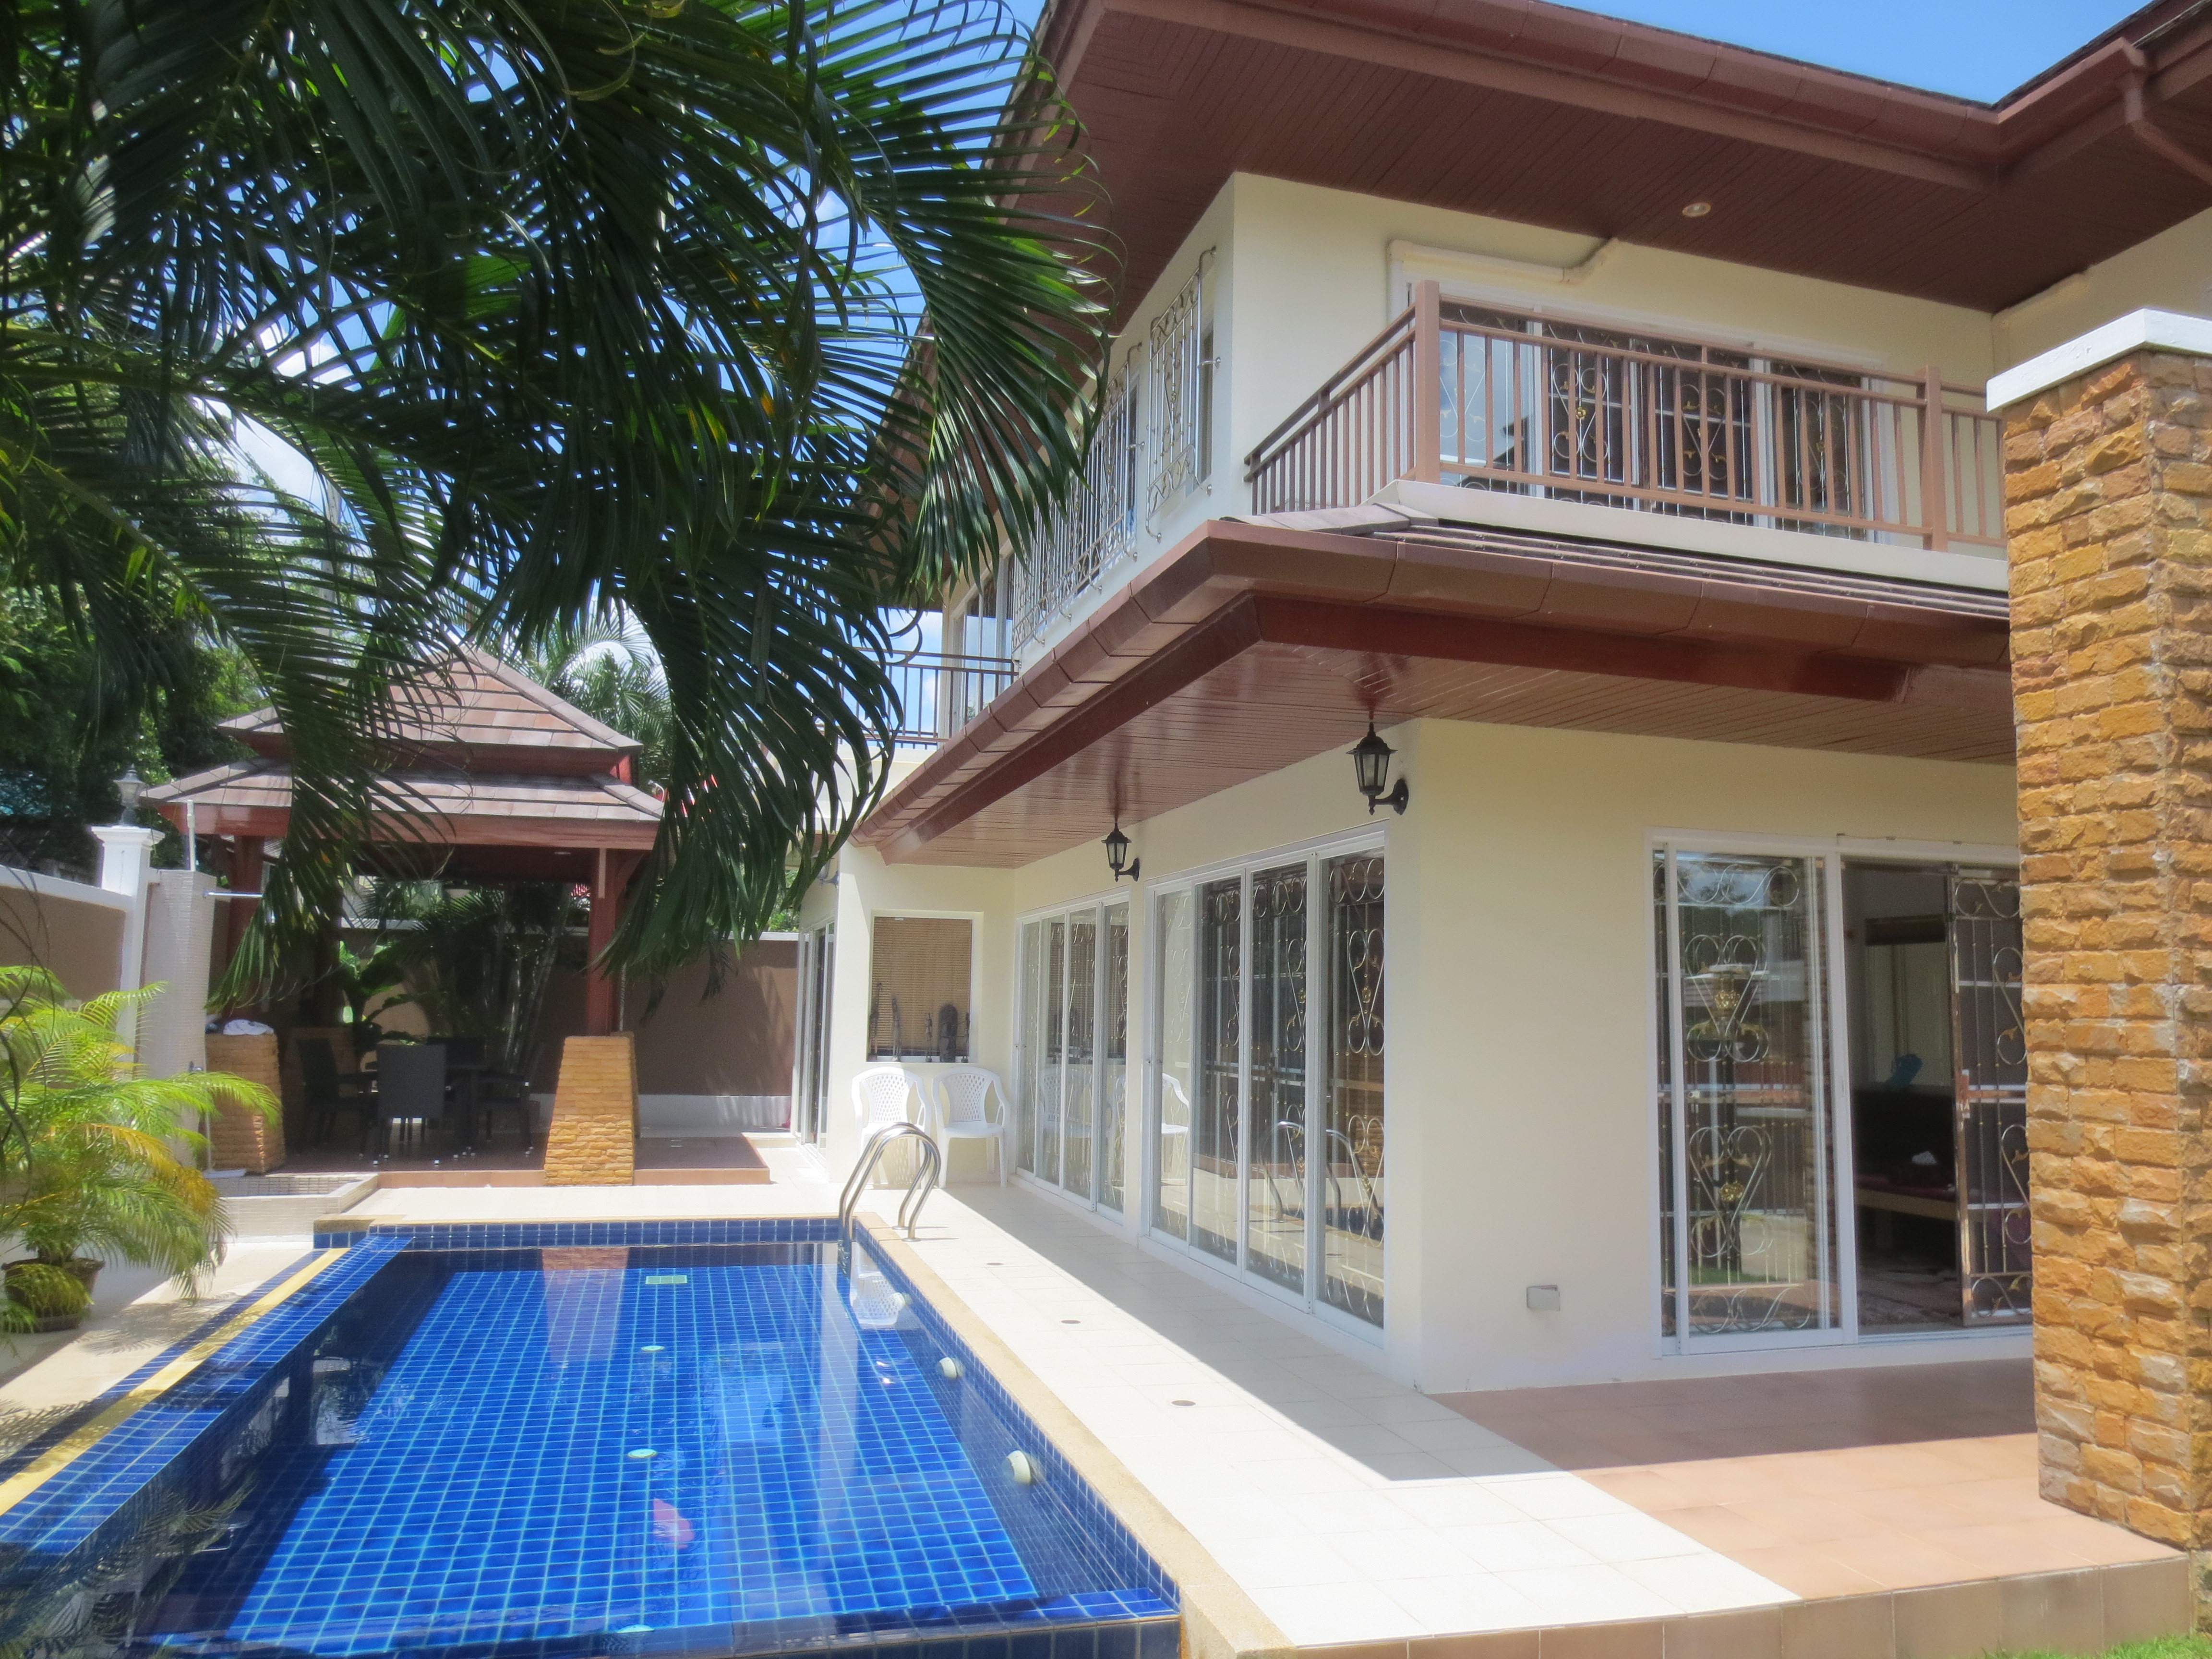 3 bed 3 bathroom home in Chalong Phuket